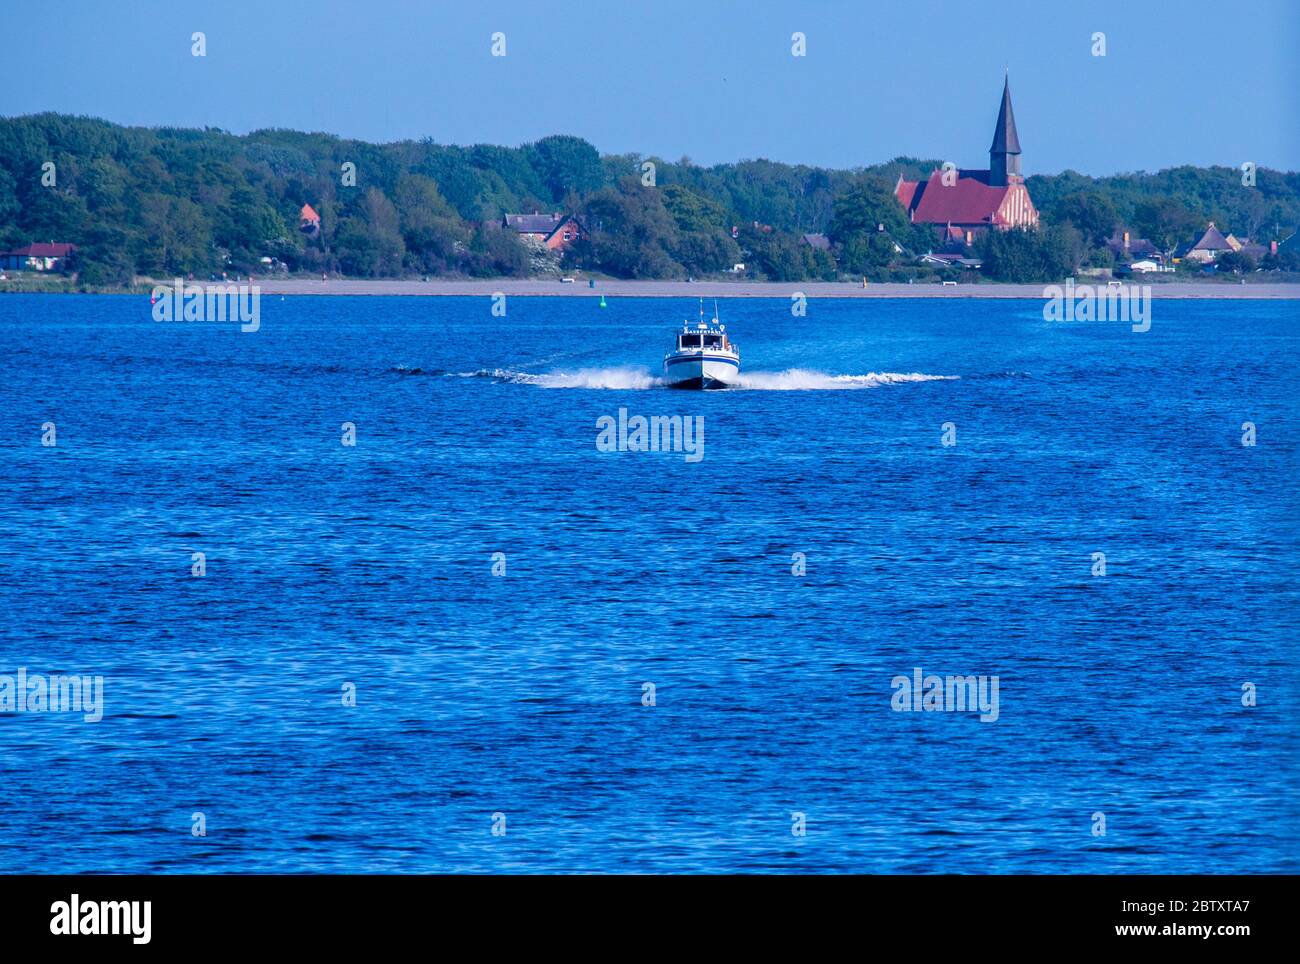 Vitte, Germany. 25th May, 2020. A water taxi takes holidaymakers across the Baltic Sea from the island of Rügen to Hiddensee. Credit: Jens Büttner/dpa-Zentralbild/ZB/dpa/Alamy Live News Stock Photo